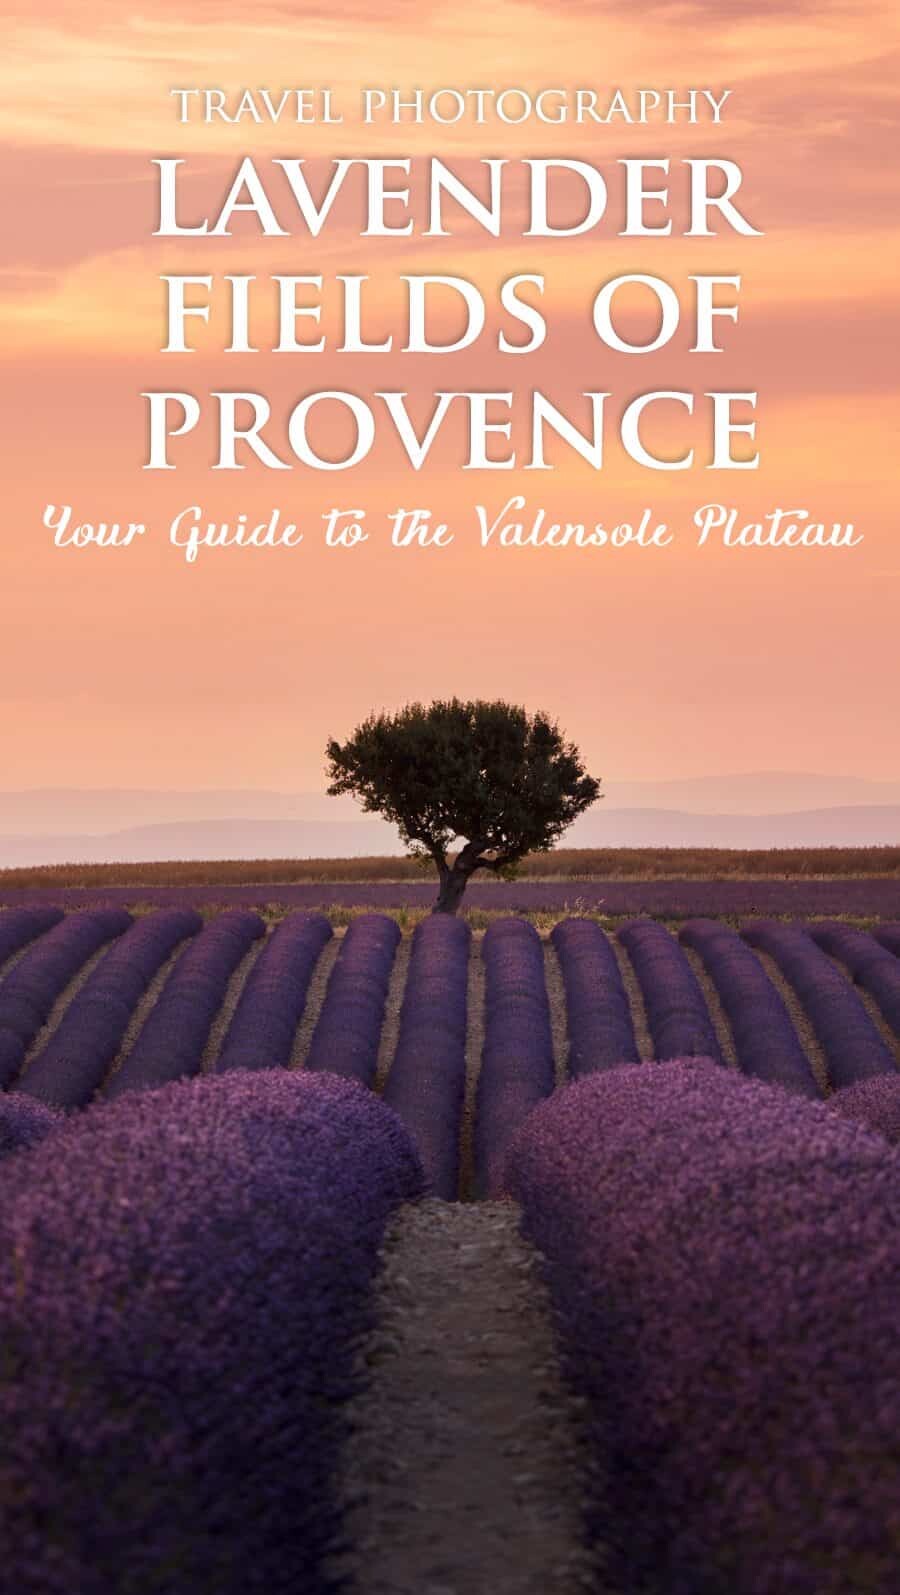 Lavender Fields in Provence, France by The Wandering Lens a complete guide to the most photogenic fields!